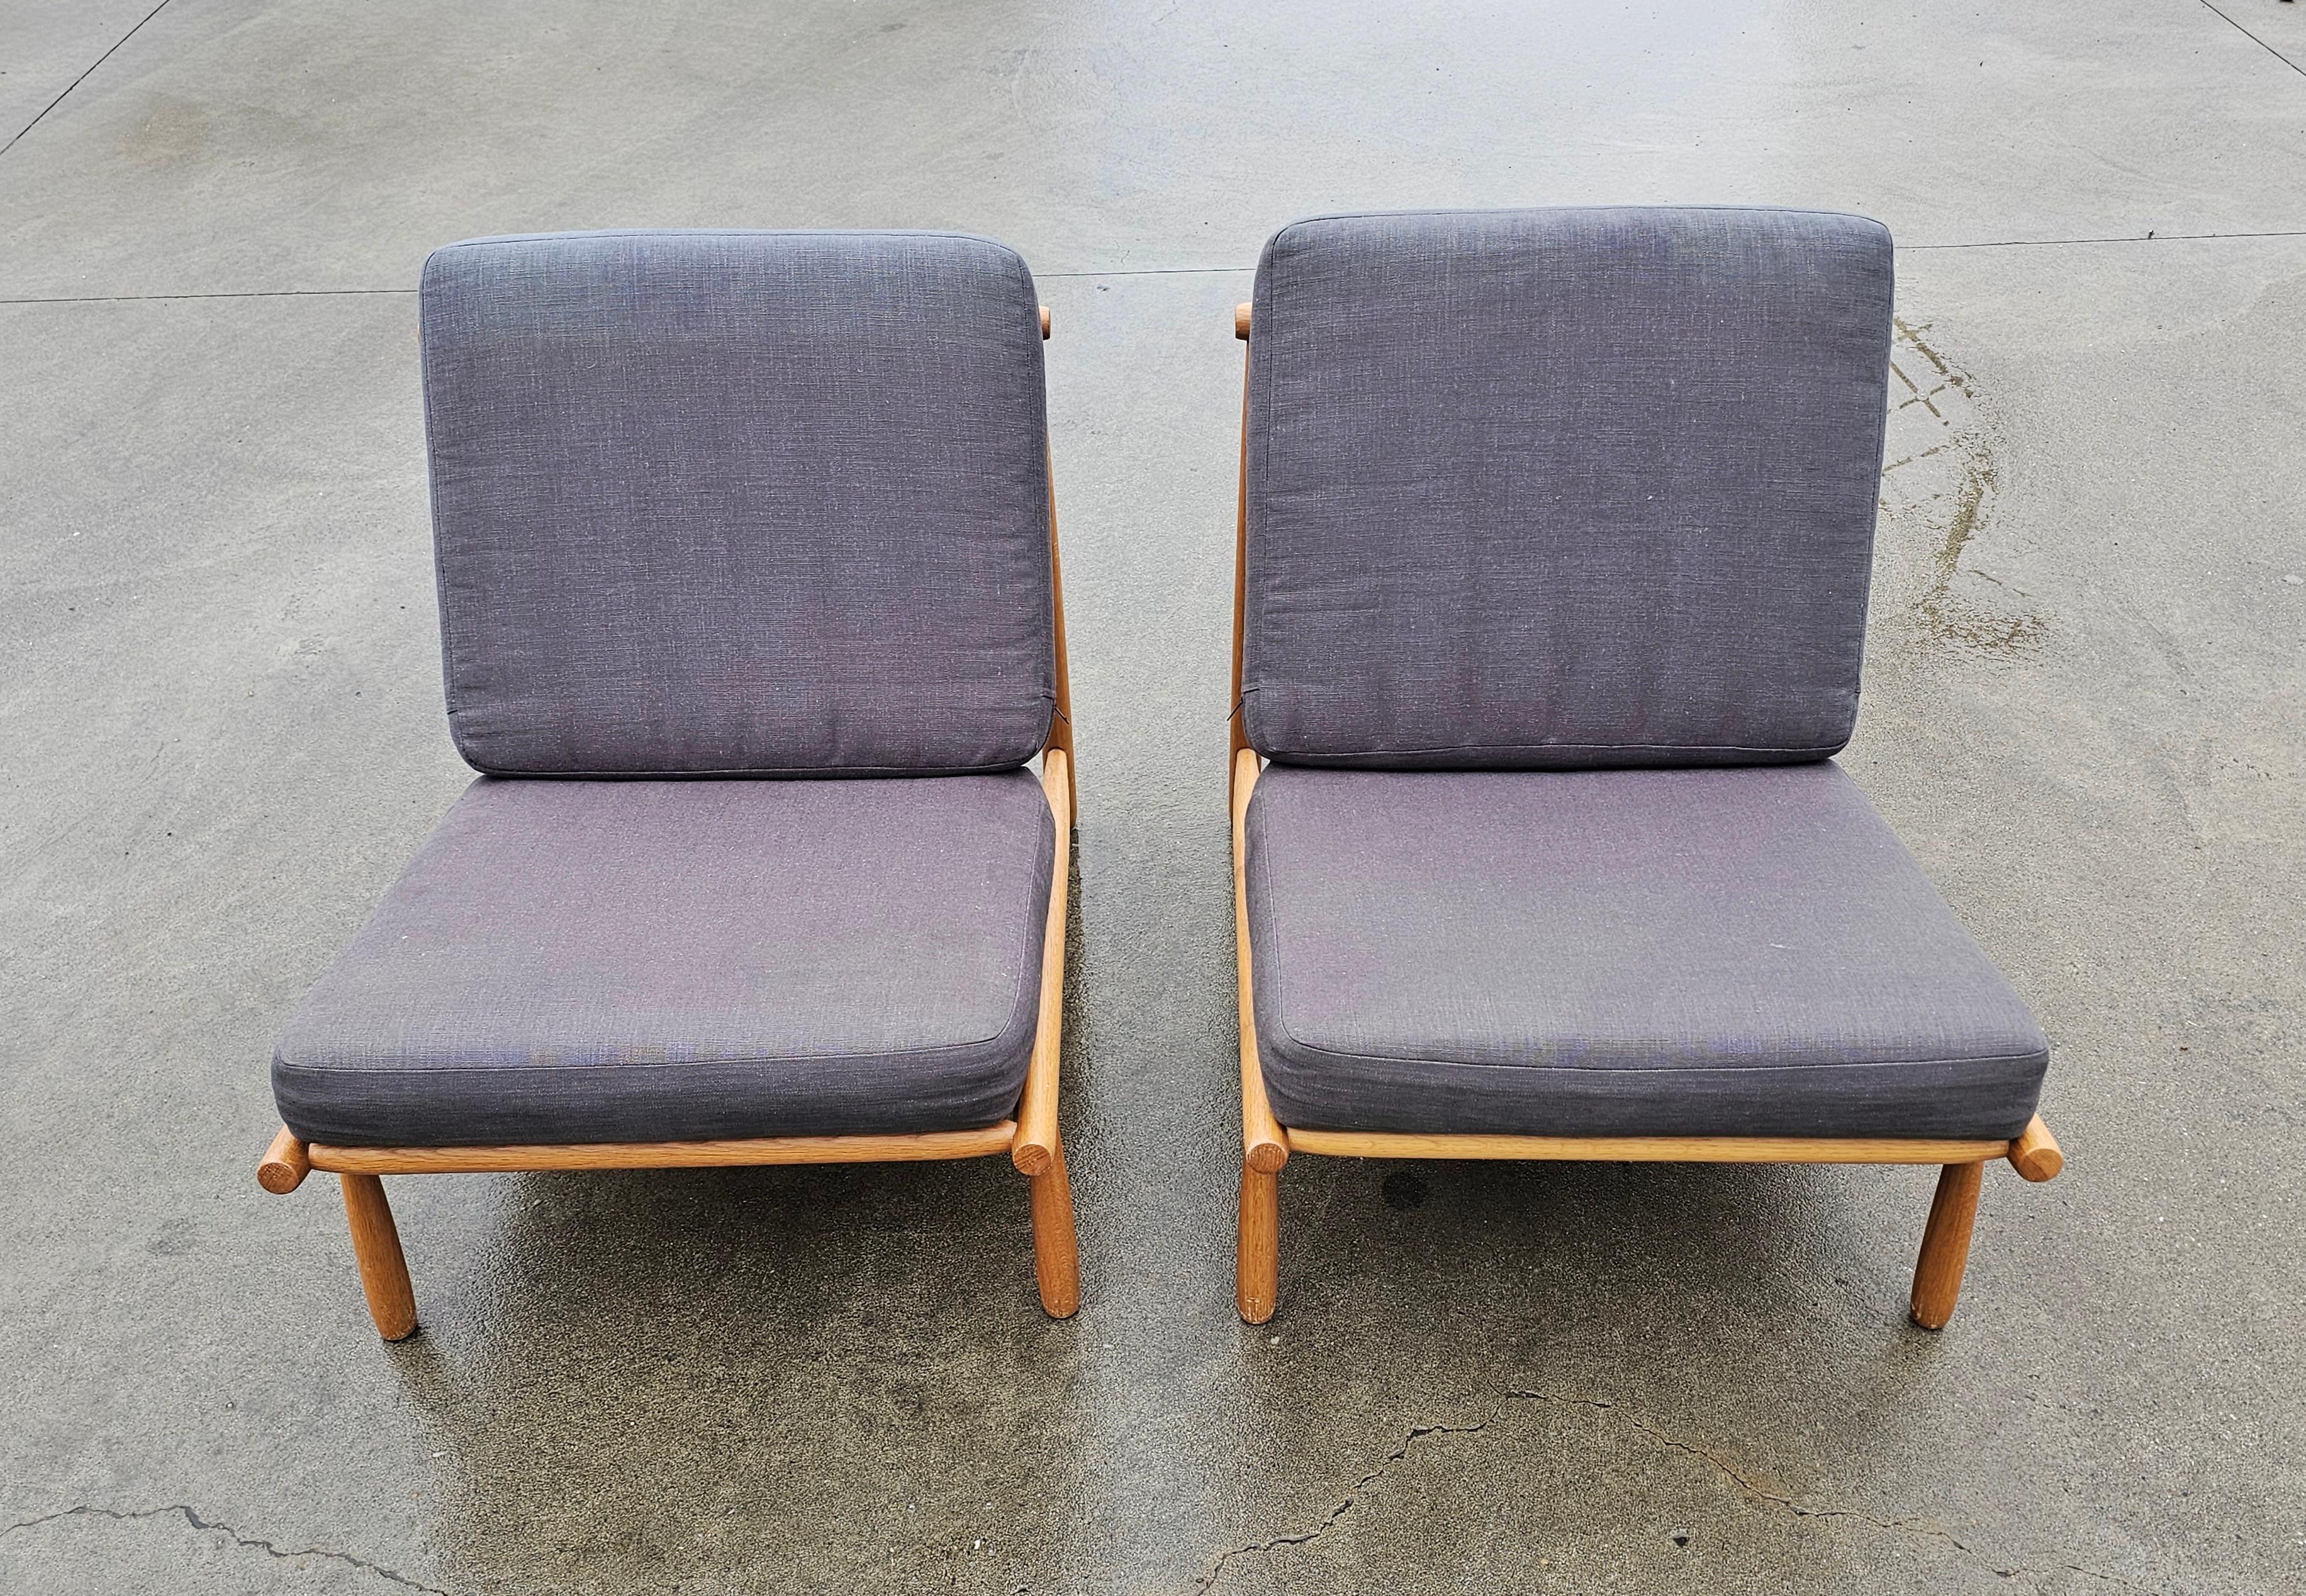 Swedish Pair of Domus Lounge Chairs by Alf Svensson for Dux Sweden, Sweden 1960s